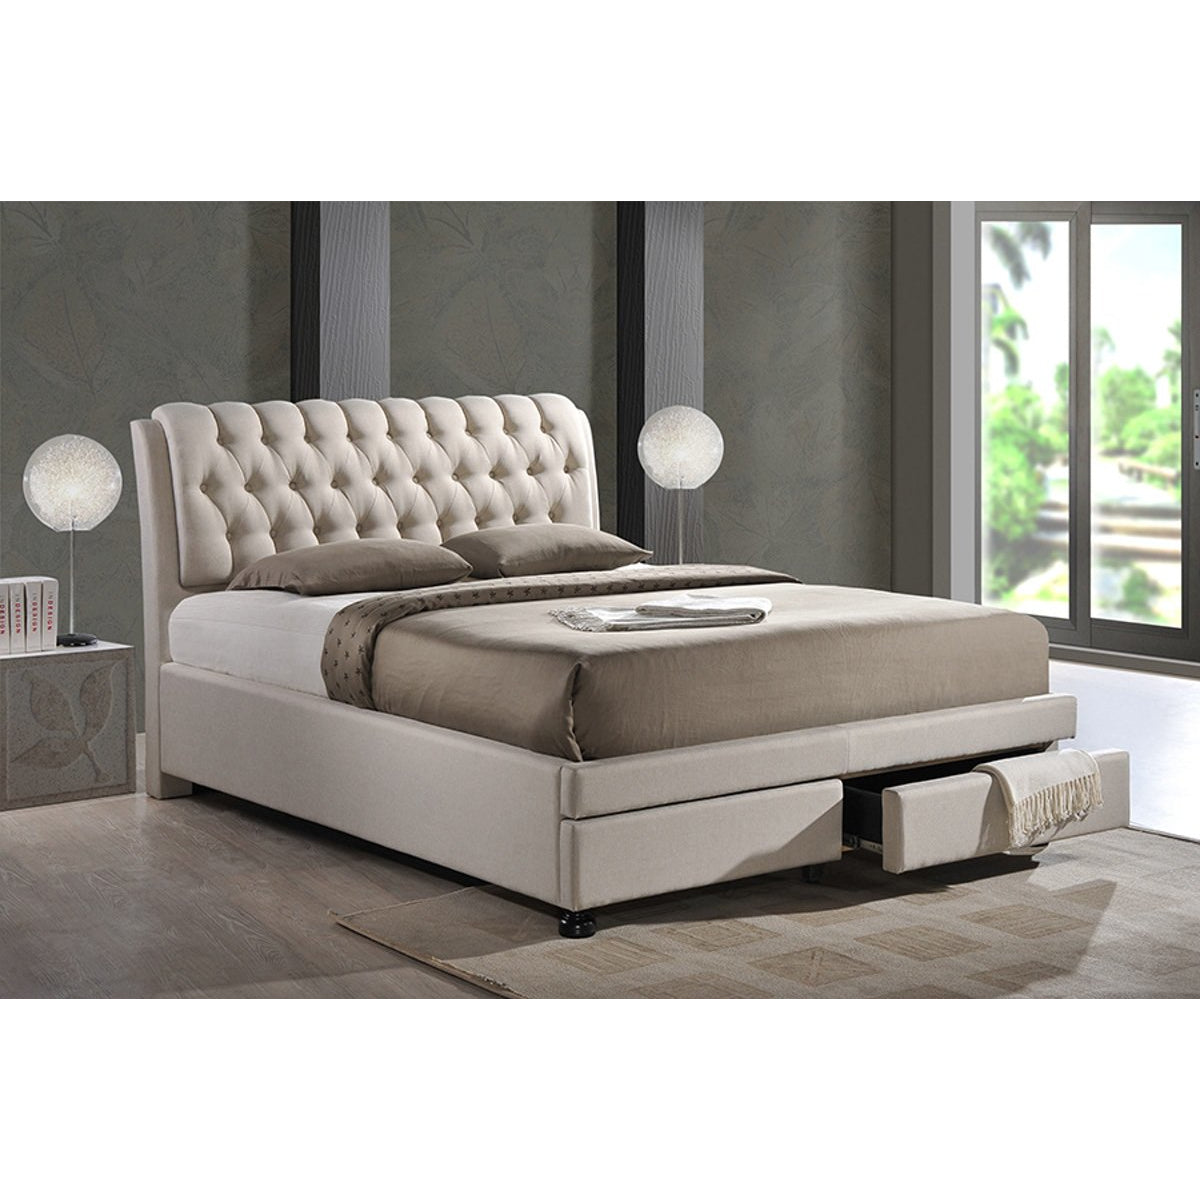 Baxton Studio Ainge Contemporary Button-Tufted Light Beige Fabric Upholstered Storage King-Size Bed with 2-drawer Baxton Studio-beds-Minimal And Modern - 5